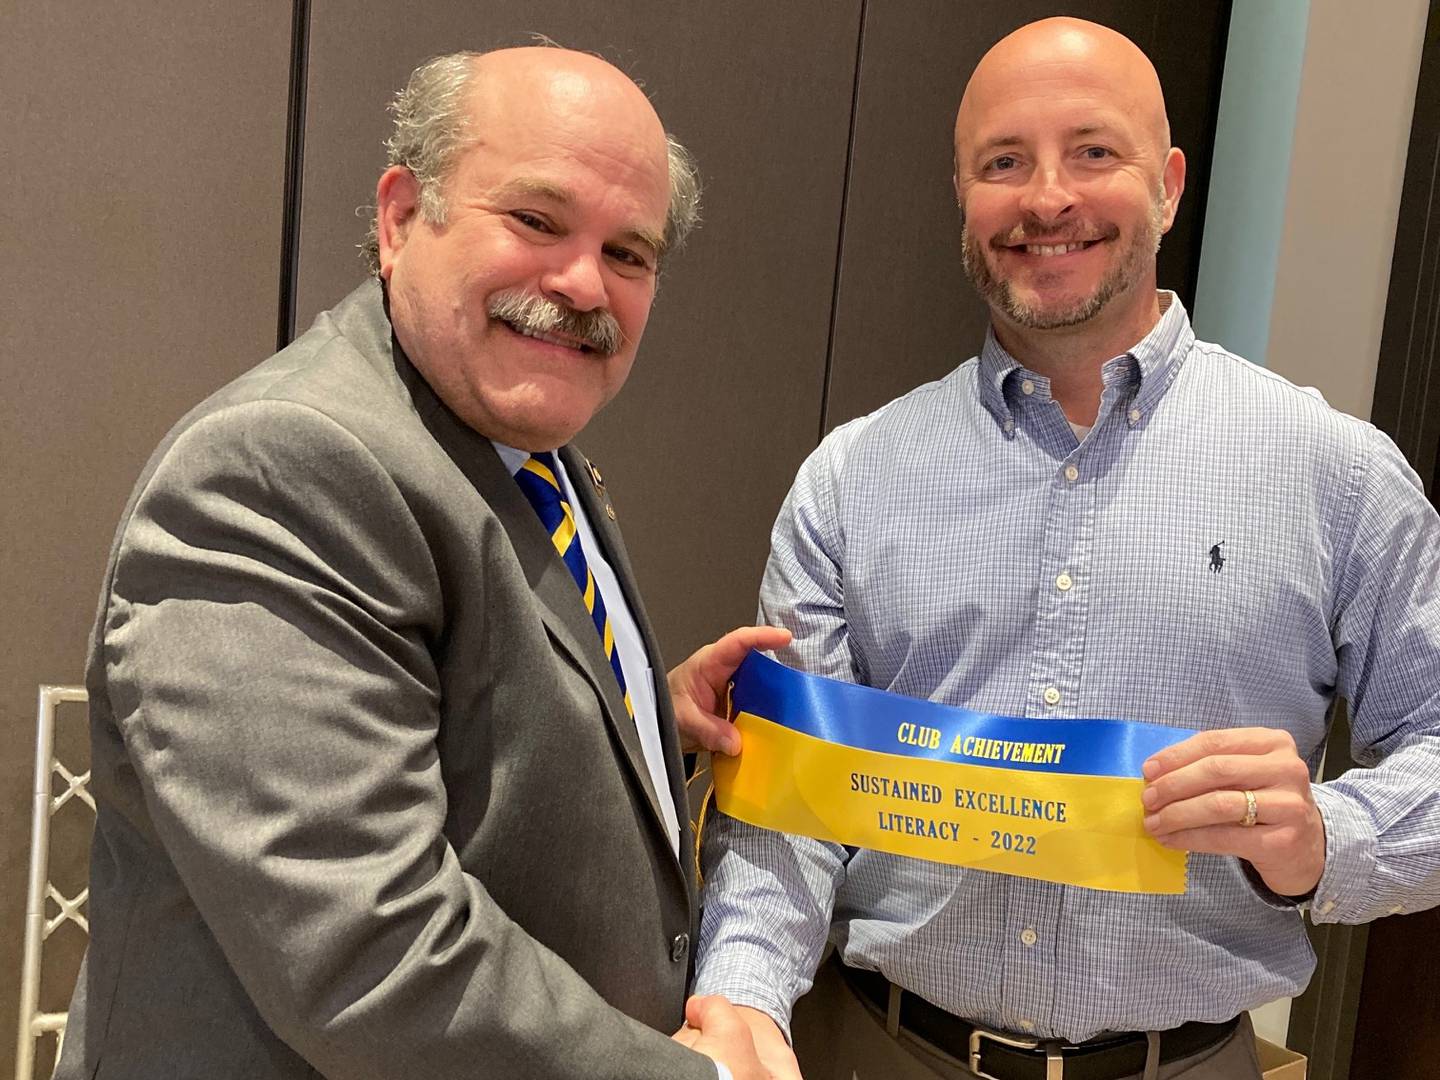 Andy Axup, left, a professor at St. Ambrose University and the literacy committee chairman for Rotary District 6420, presents Tom Myers, president of the Rock Falls Rotary, with two awards. Both awards recognize the Rotary club's effort to improve literacy in the community.